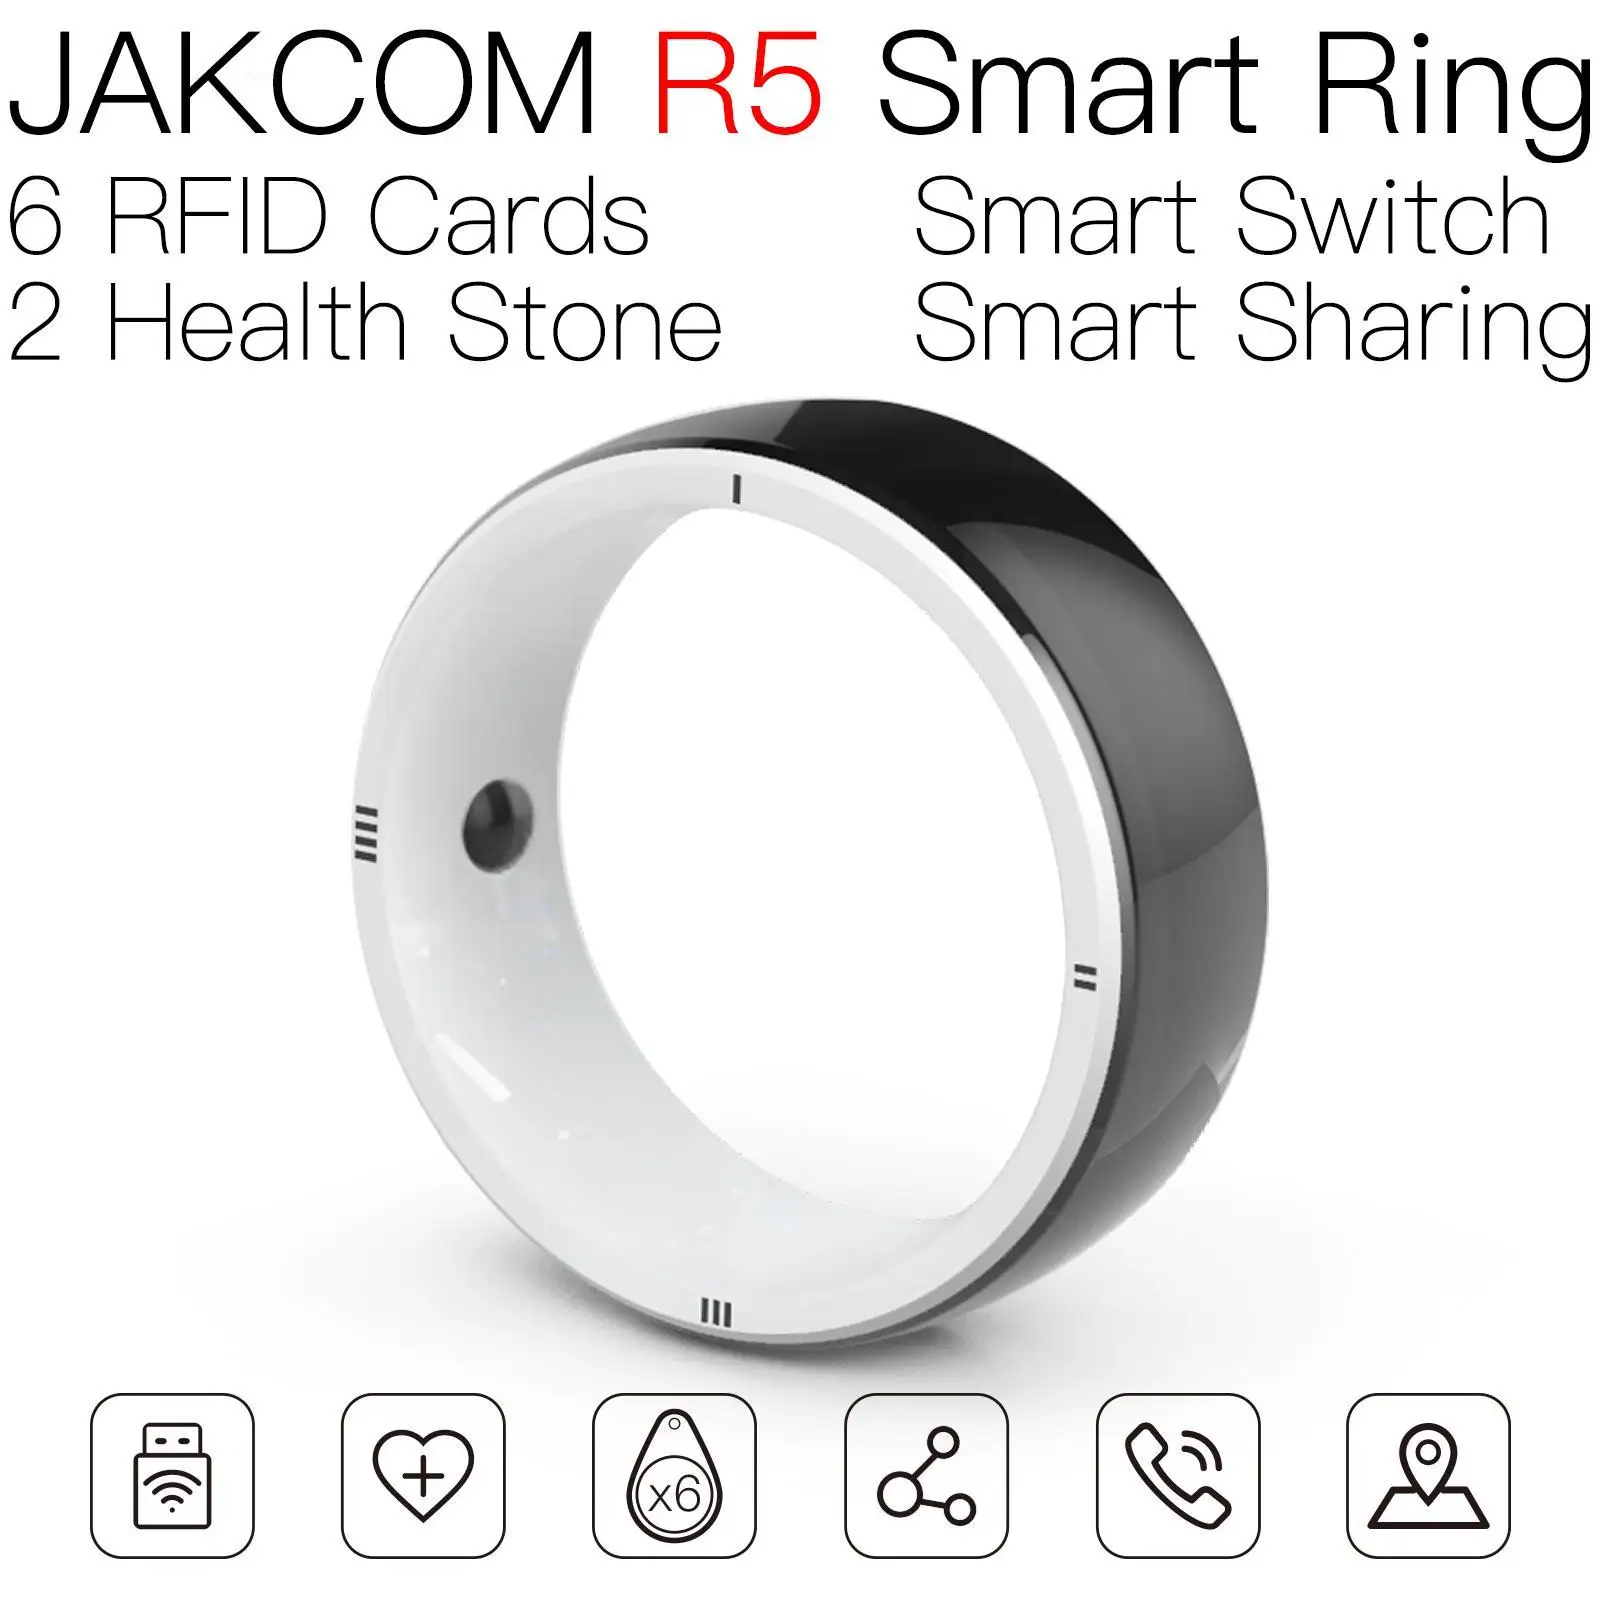 

JAKCOM R5 Smart Ring New arrival as transponder pcf75as nfc chips print rfid tag reader black card matte pvc with contact chip